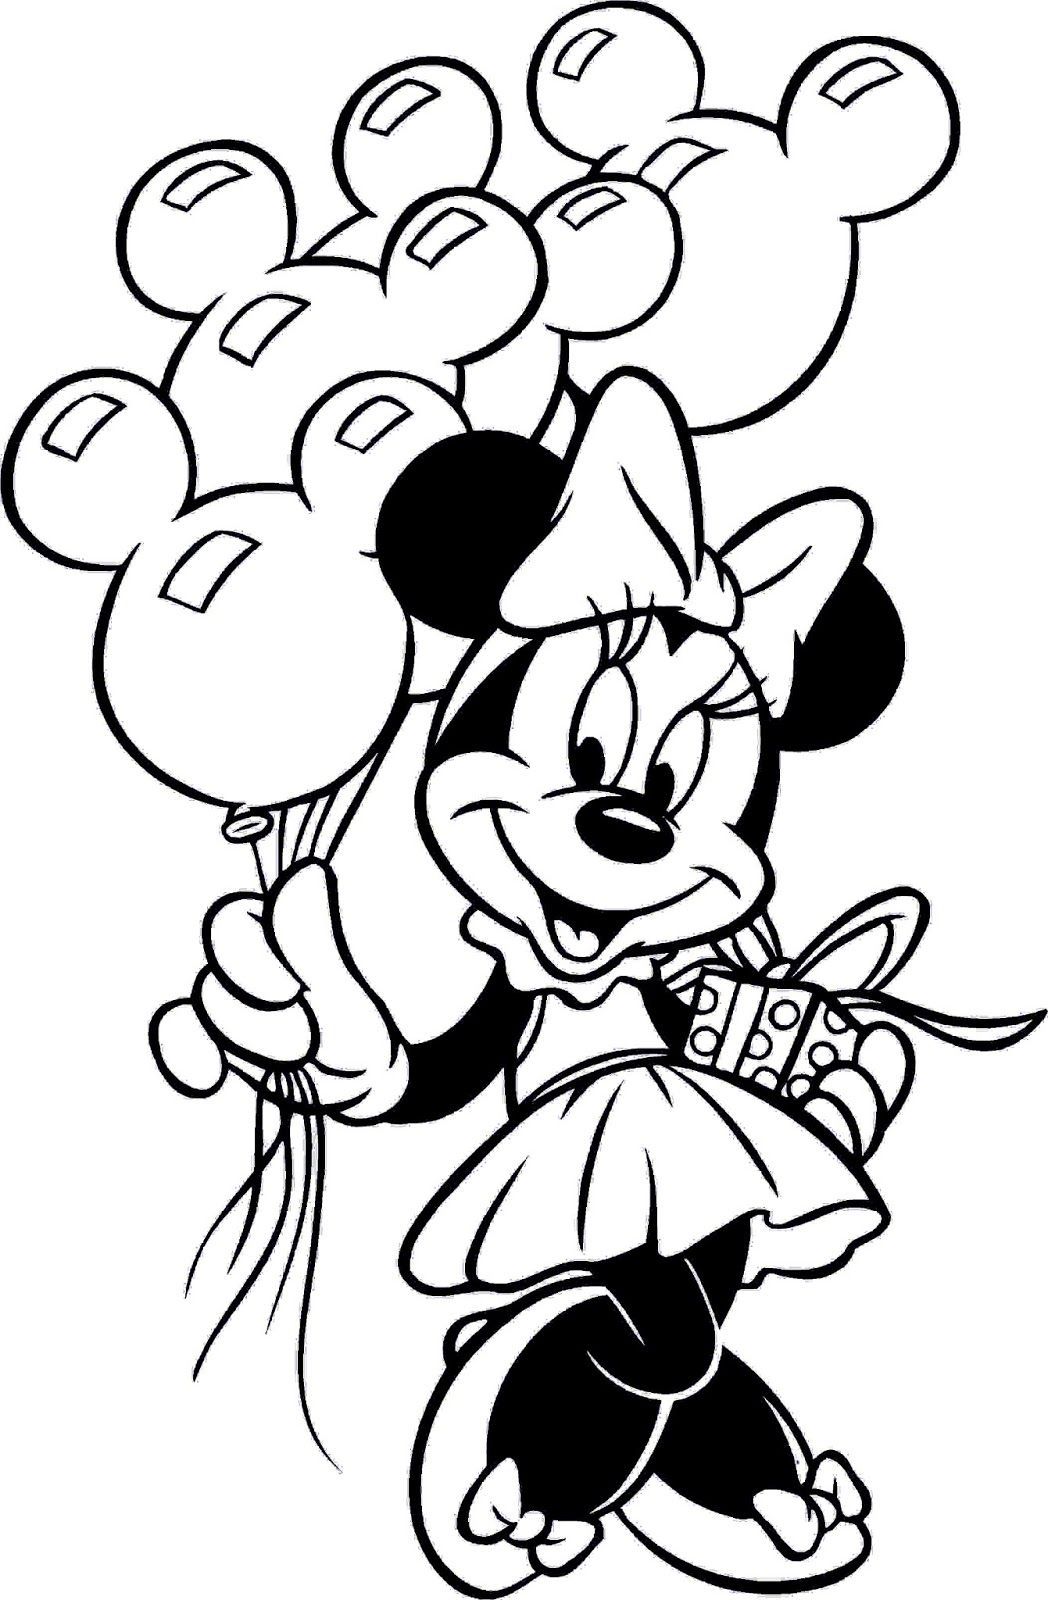 Minnie Mouse With Balloons Coloring Pages Disney Coloring Pages